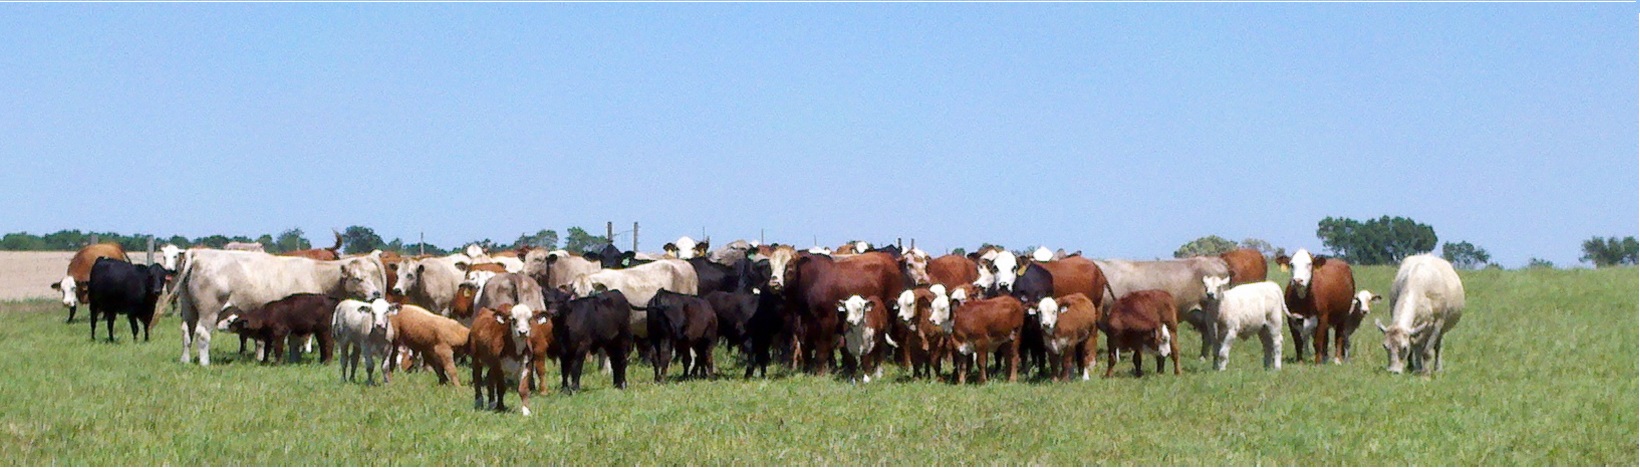 Beef Cattle at NFREC Marianna